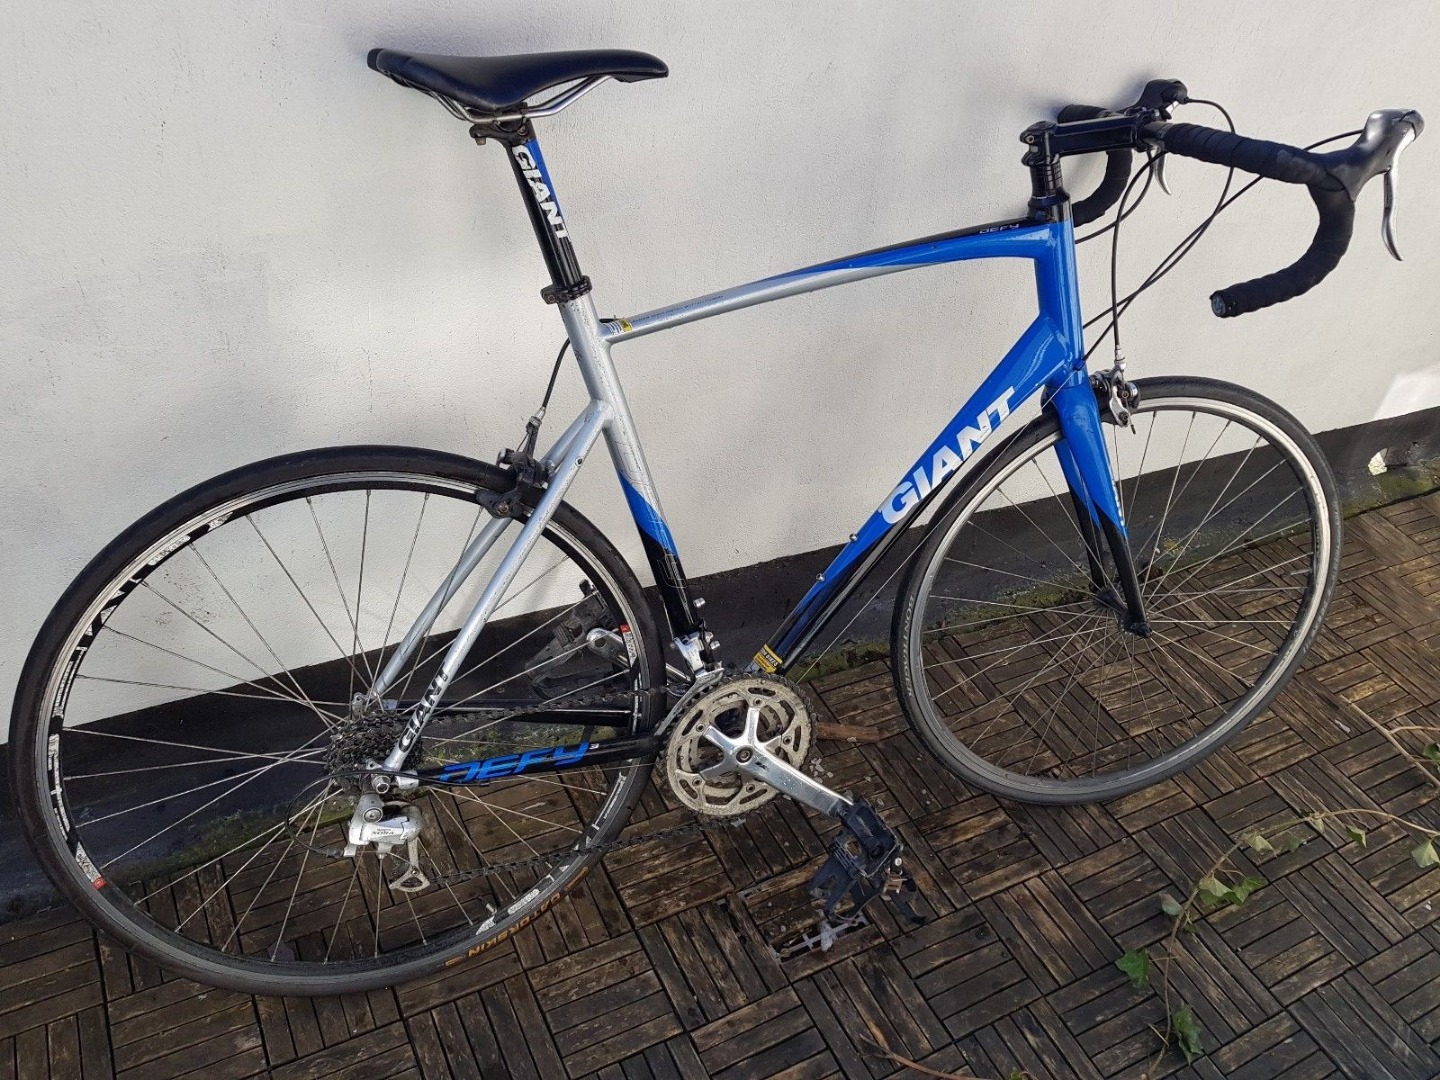 giant defy serial number to find age